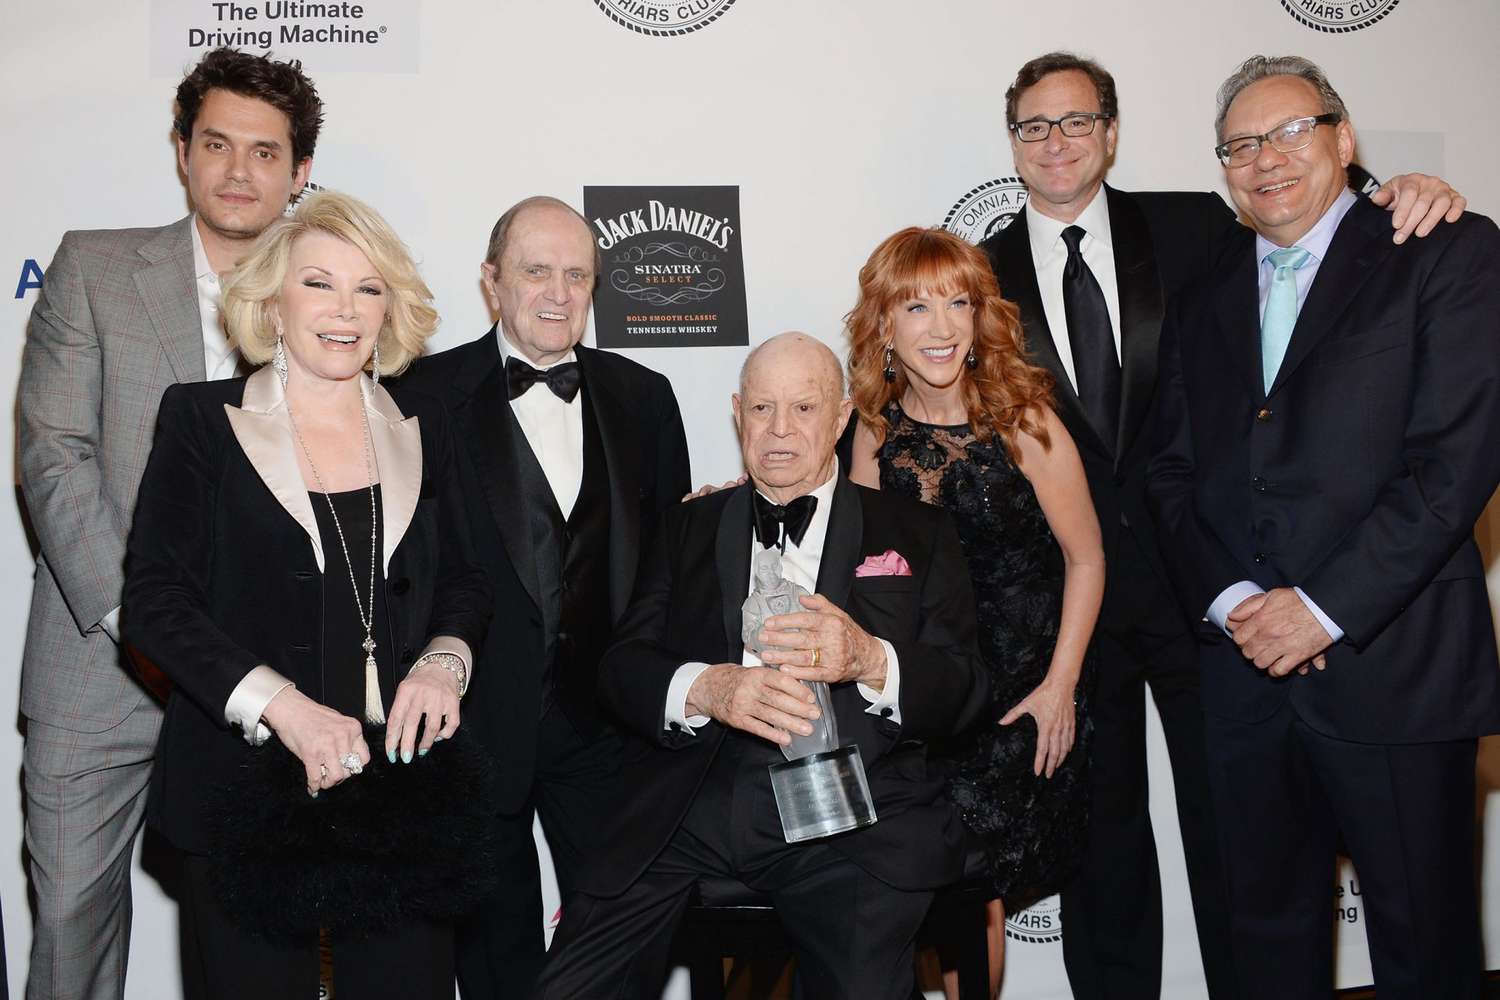 Don Rickles With John Mayer, Joan Rivers, Bob Newhart, Kathy Griffin, Bob Saget, and Lewis Black at the Friars Foundation Annual Applause Award Gala in New York City&nbsp;on June 24, 2013